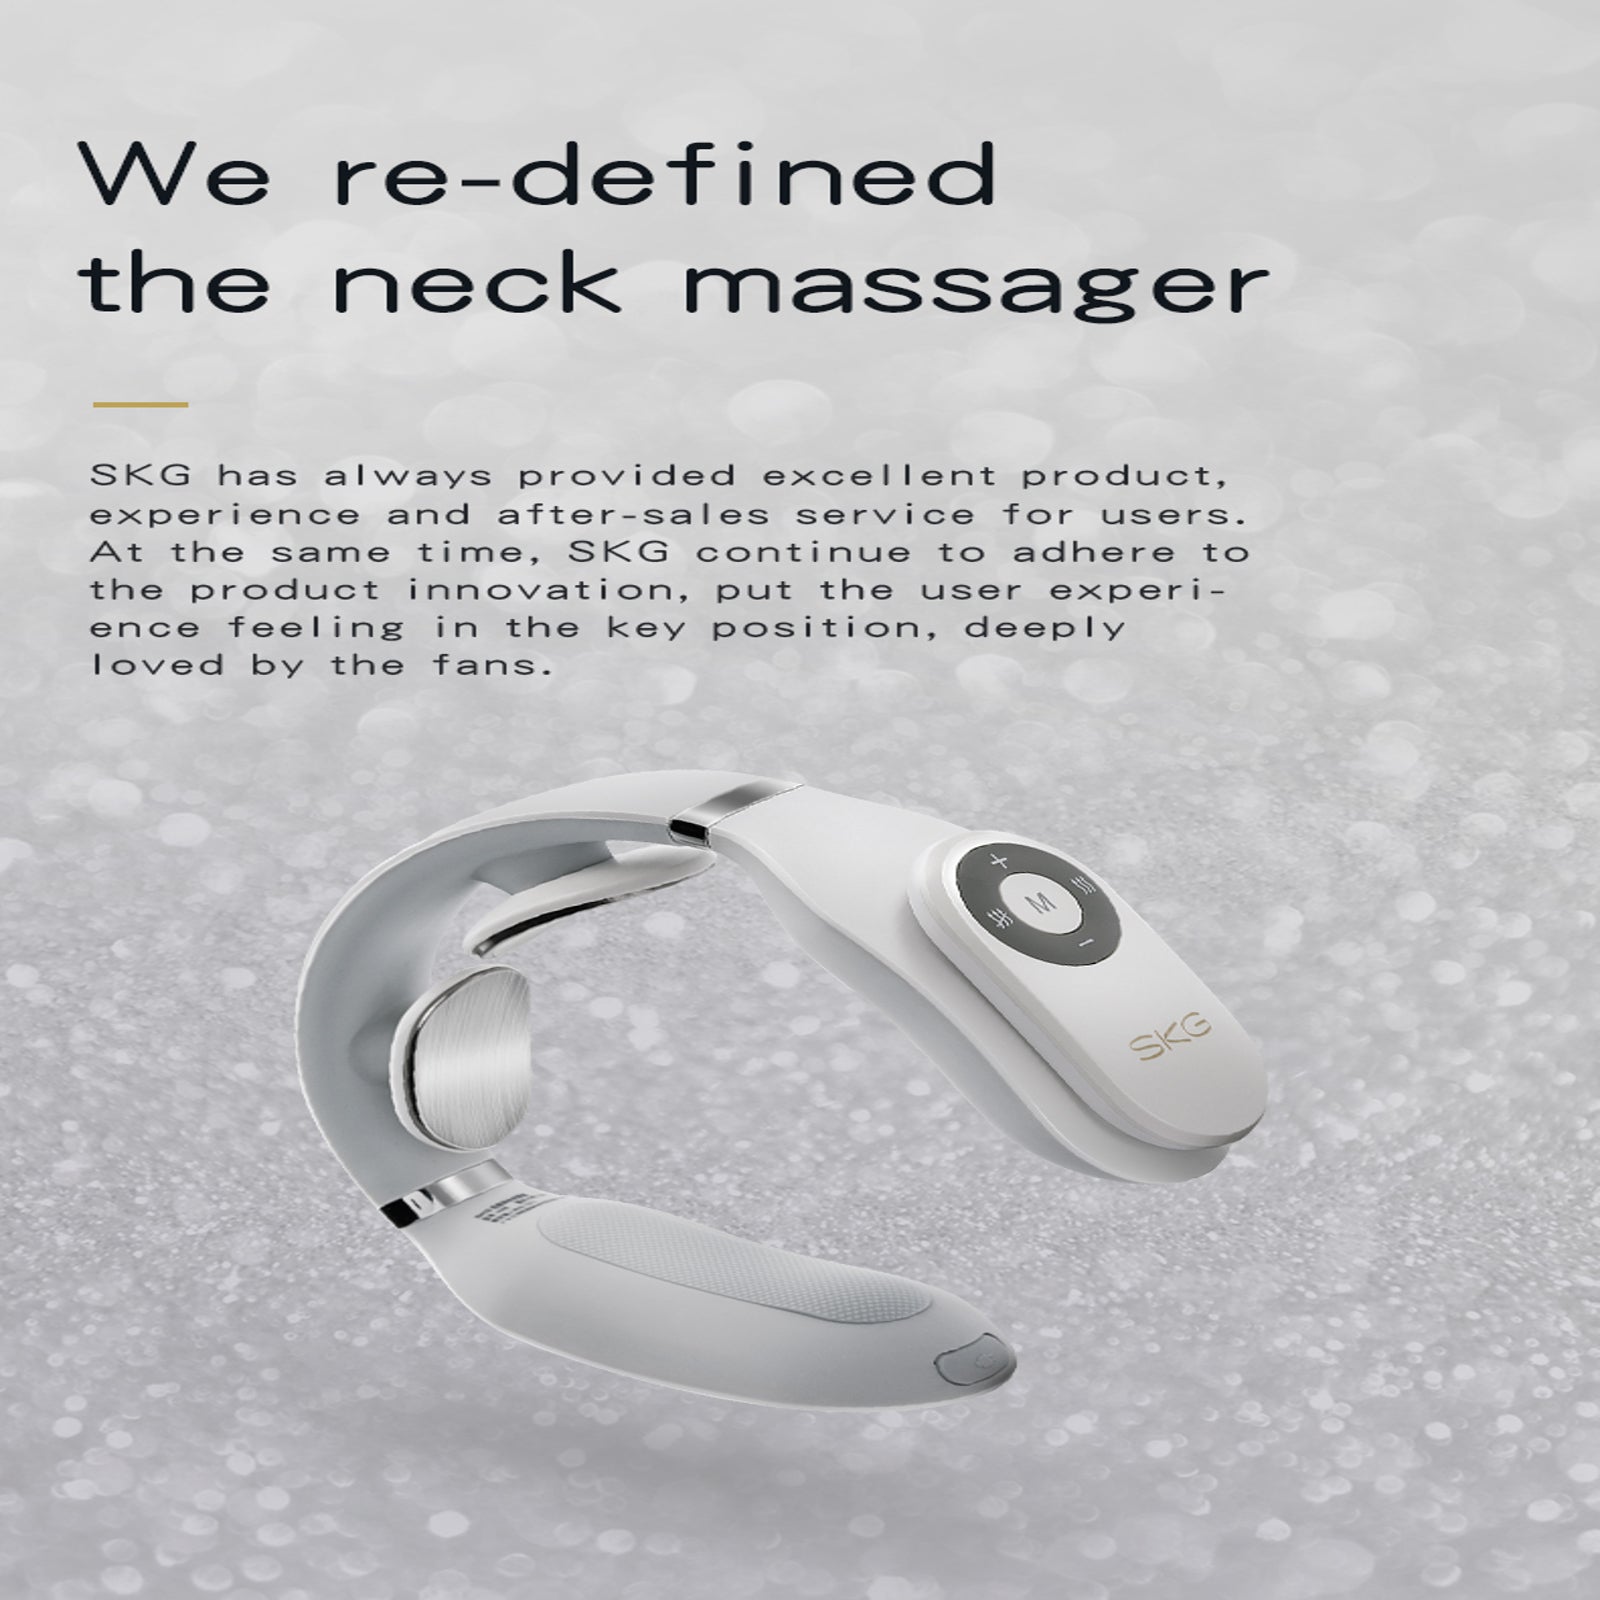 Neck Massager Review for Pain Relief? - SKG 4098 Smart Neck